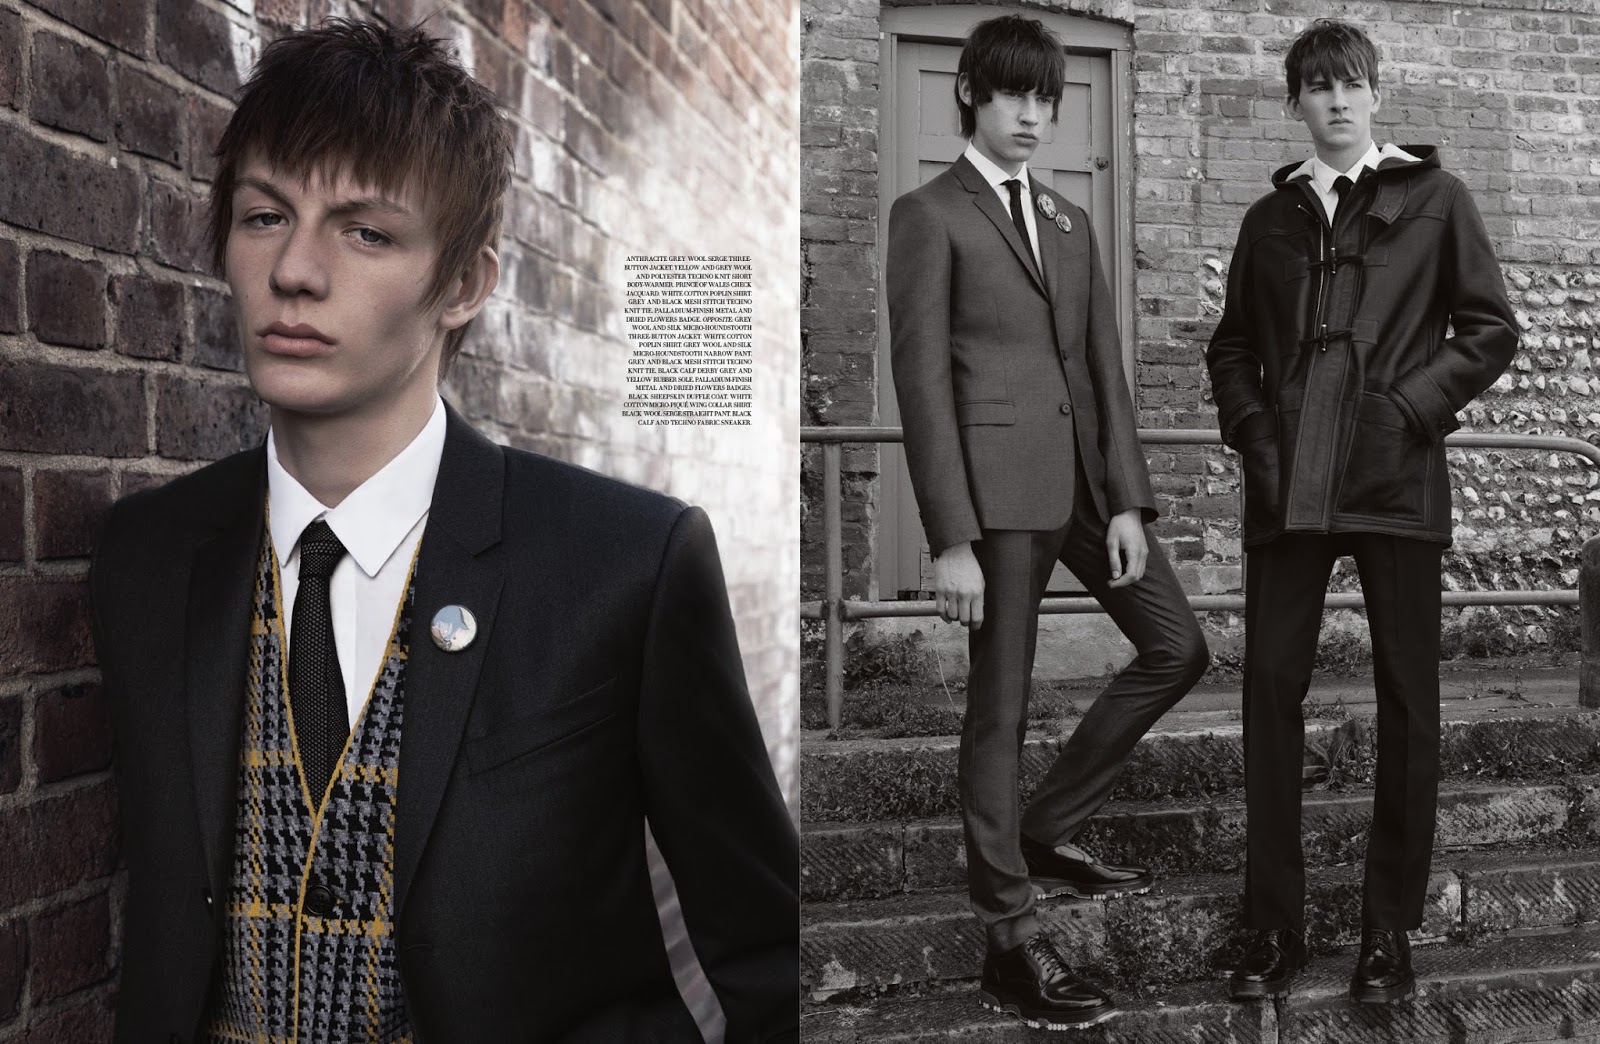 Dior Homme Goes Mod for 'Urban Tribe' Shoot – The Fashionisto